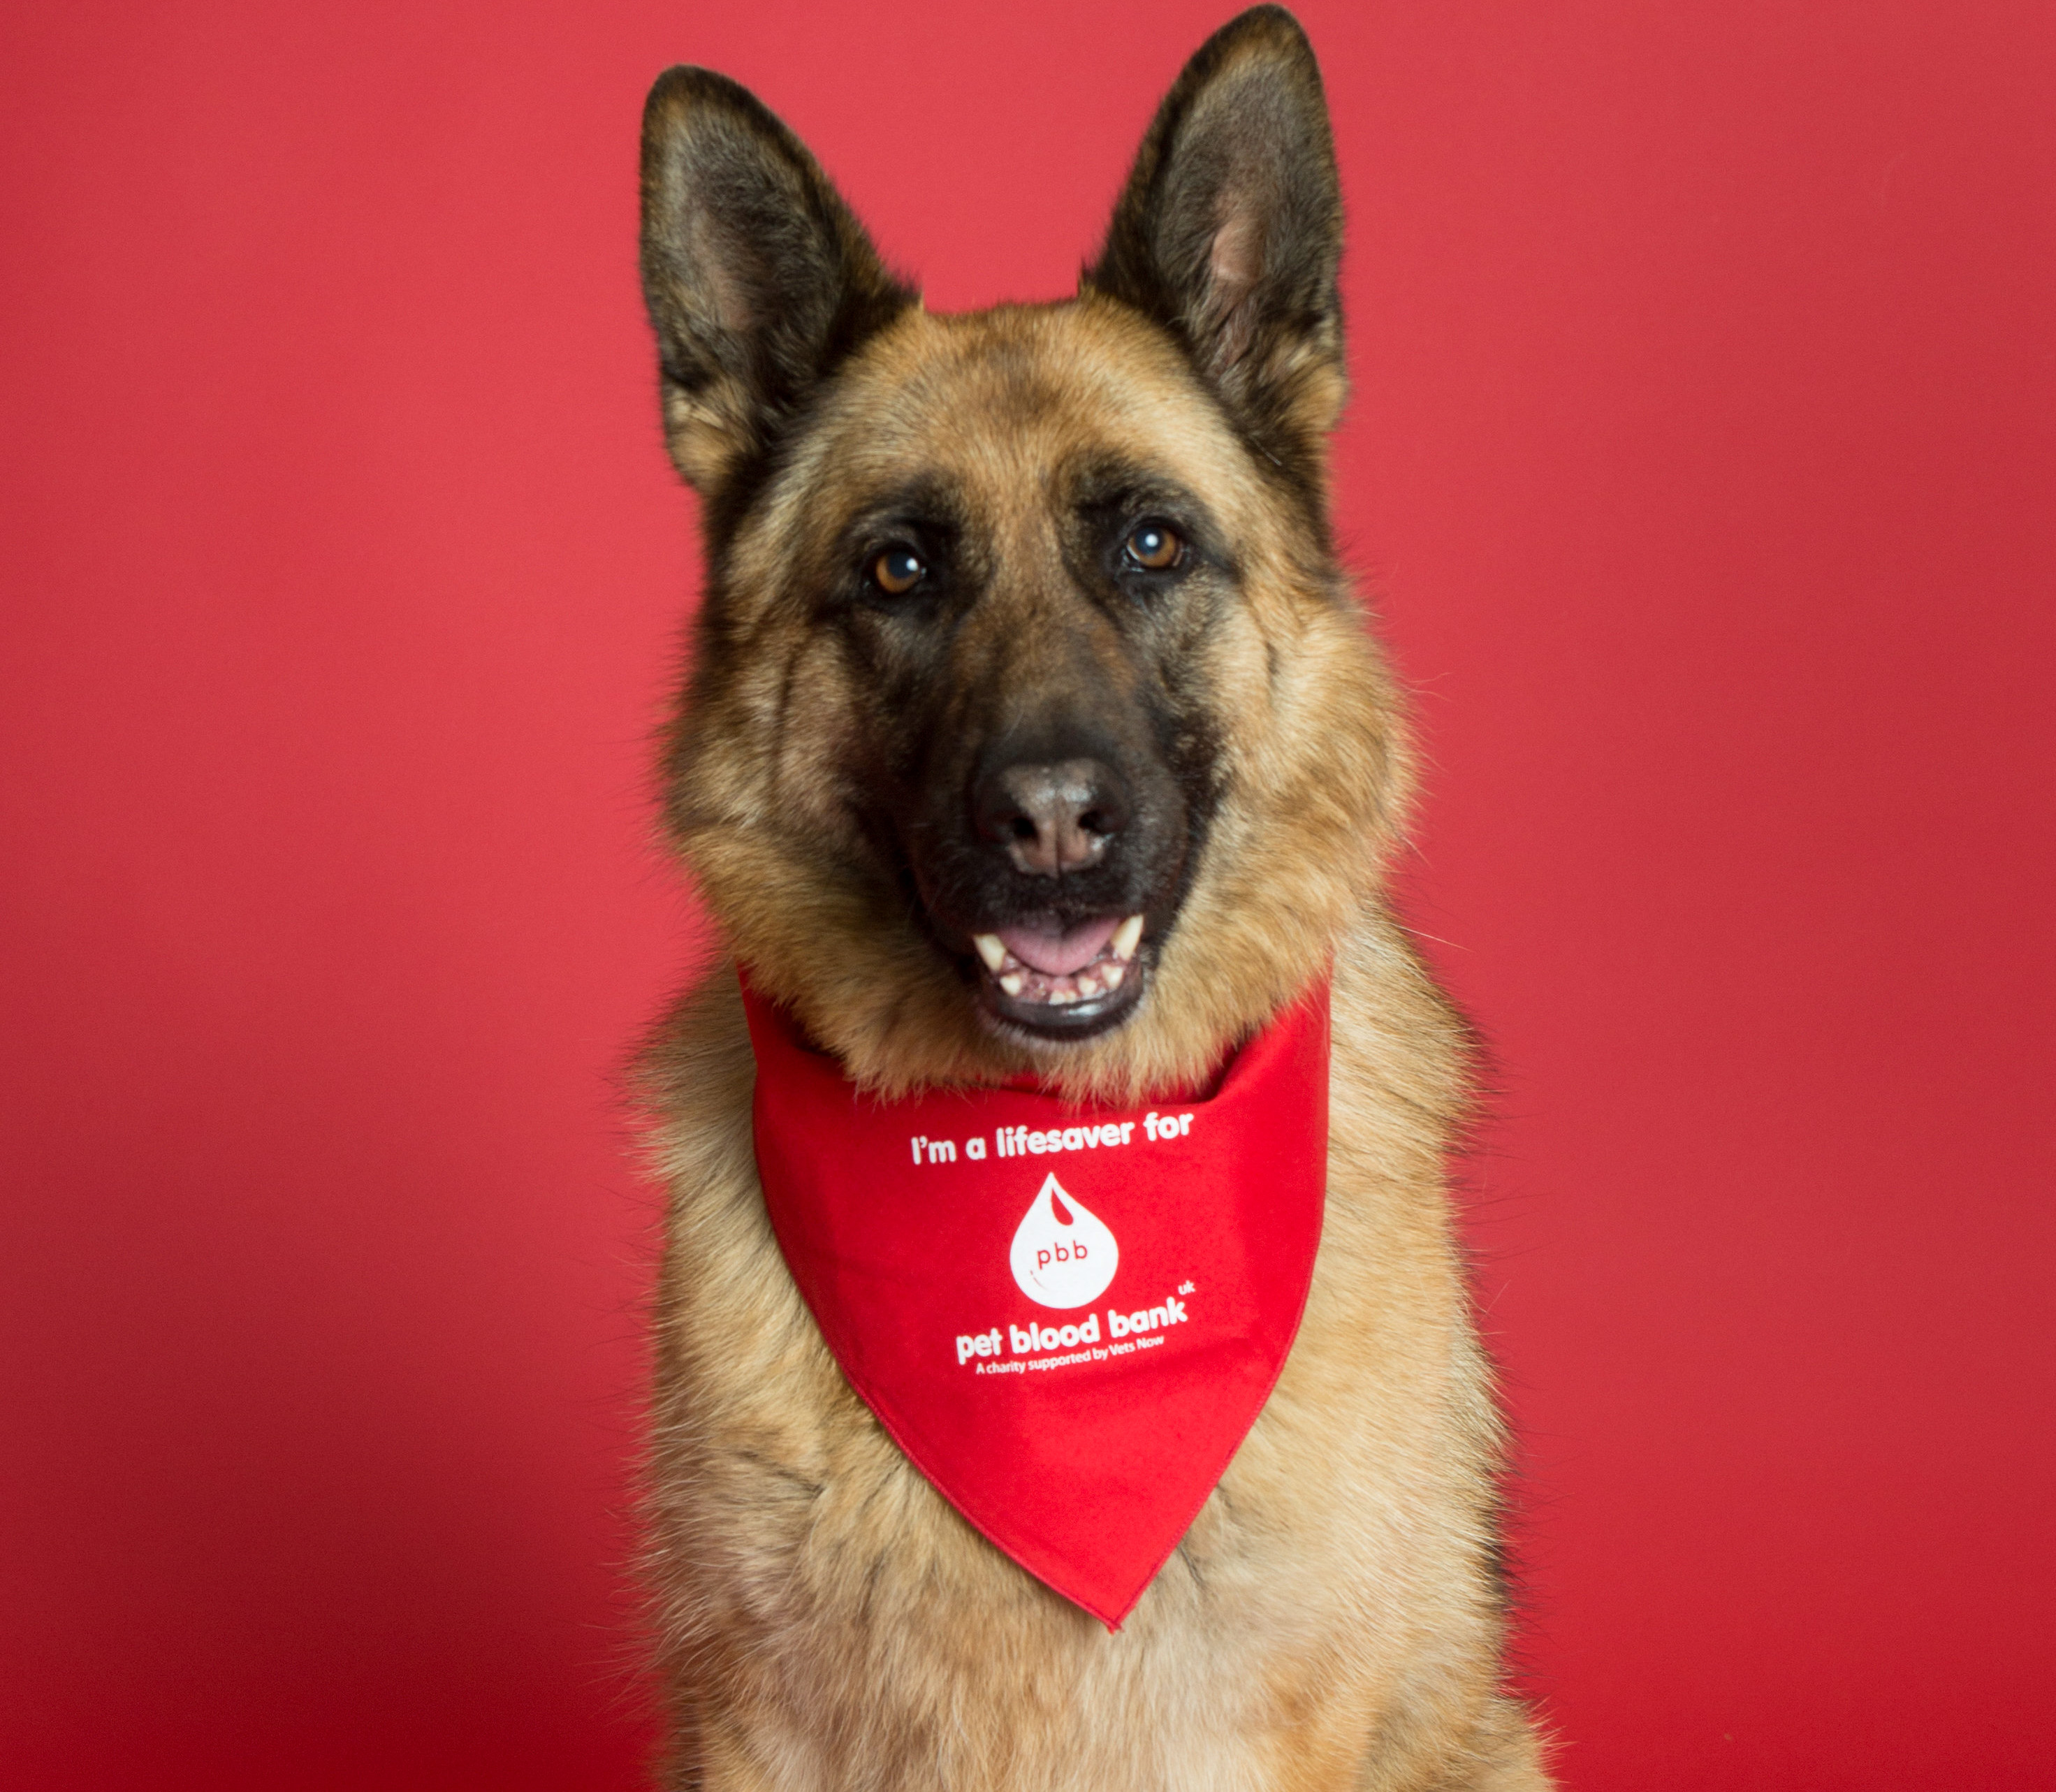 Izzy the dog wears a a red blood donation bib